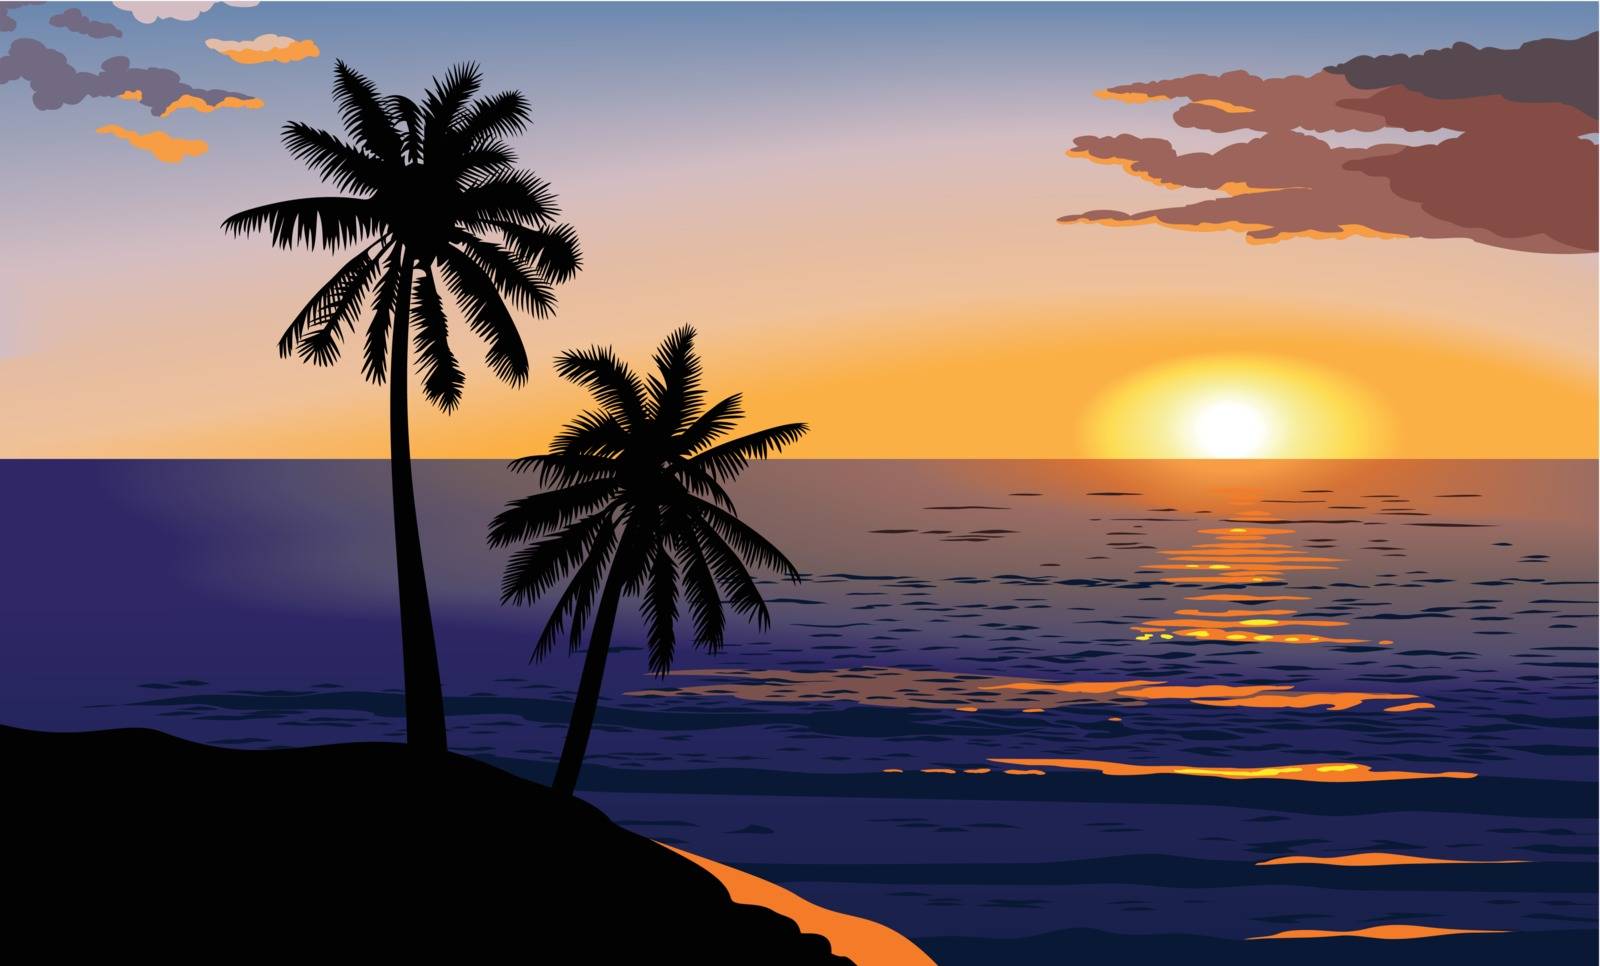 Tropical sunset at sea, palm trees and red clouds, vector illustration